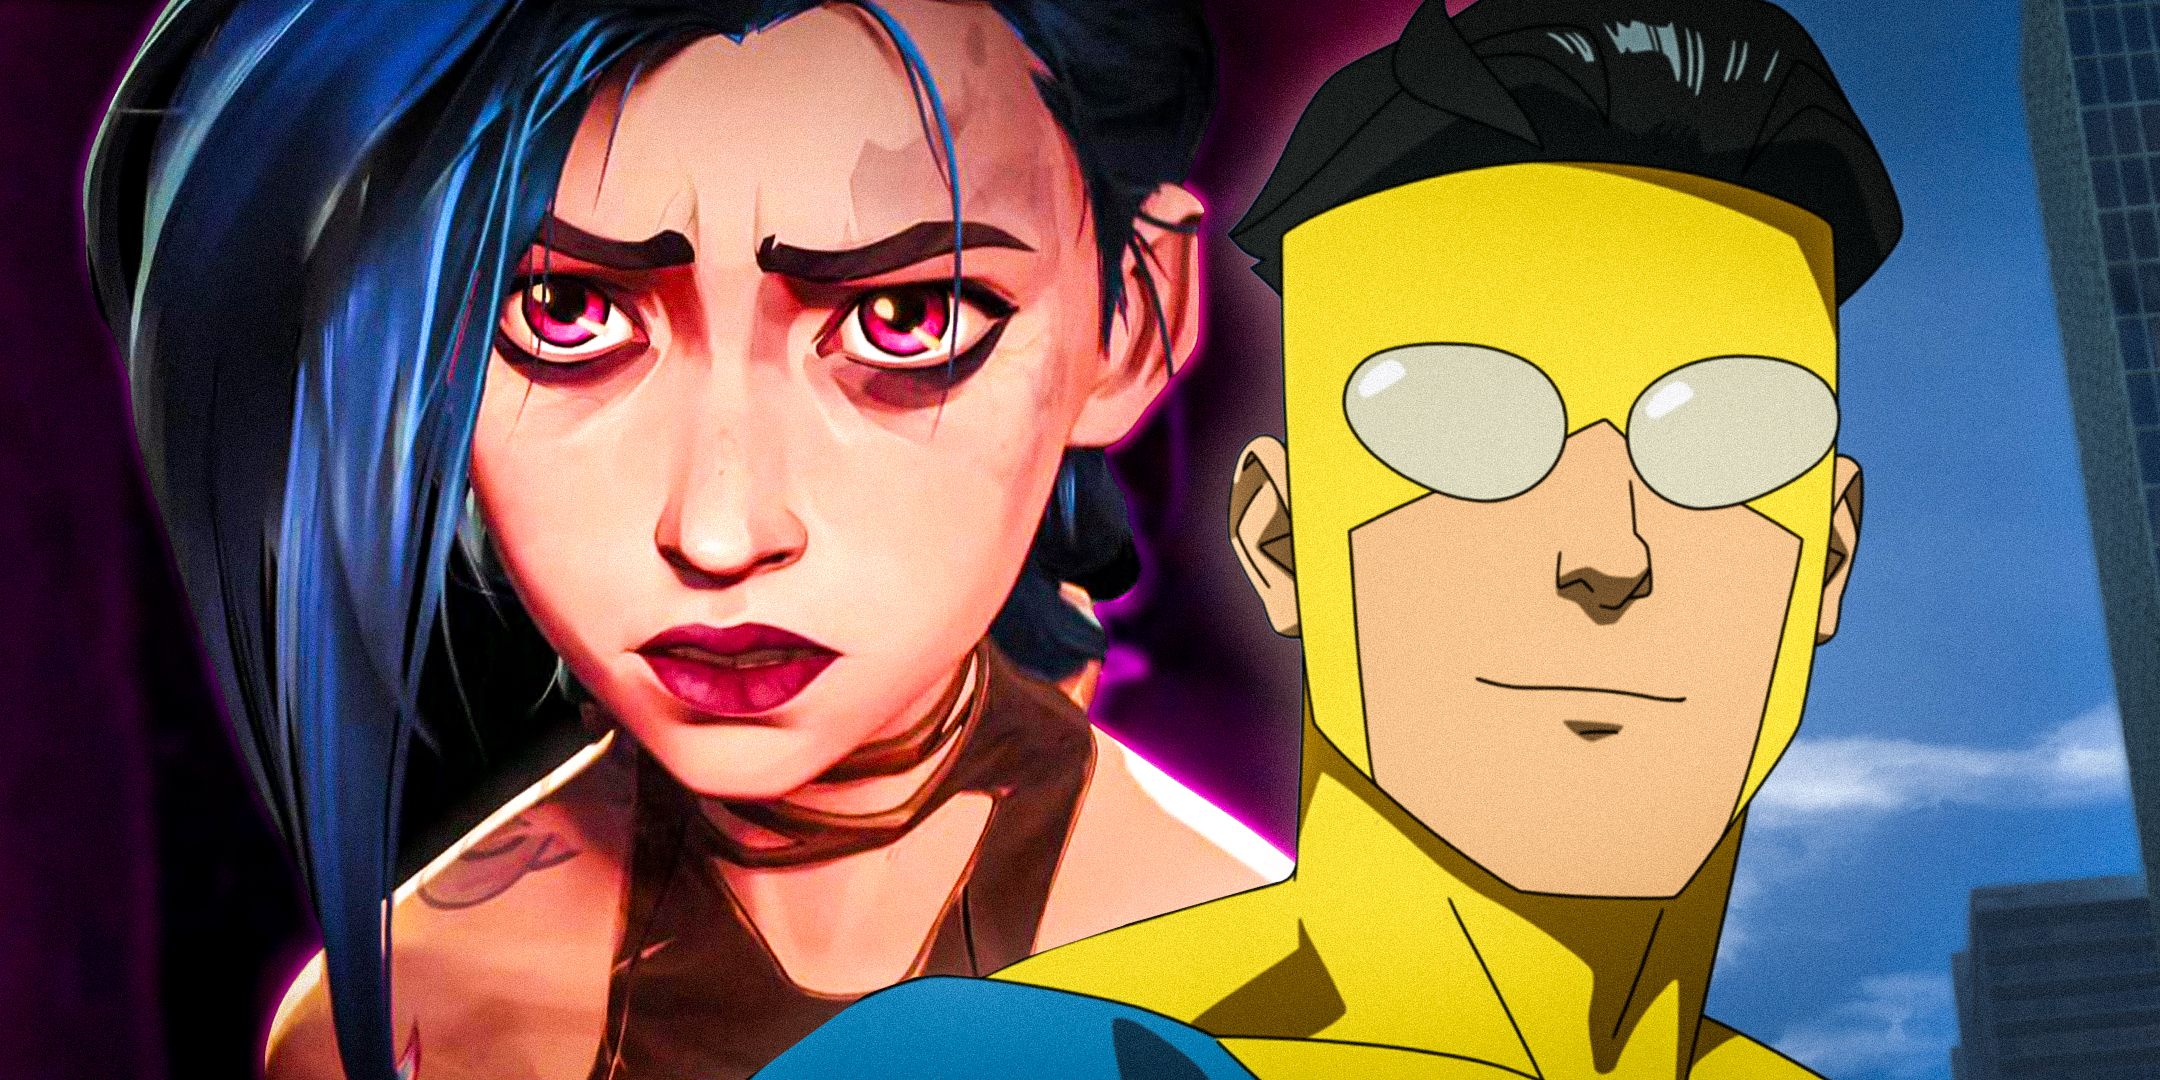 Jinx-from-Arcane-League-of-Legends-and-Steven-Yeun-as-Mark-Grayson--from-Invincible